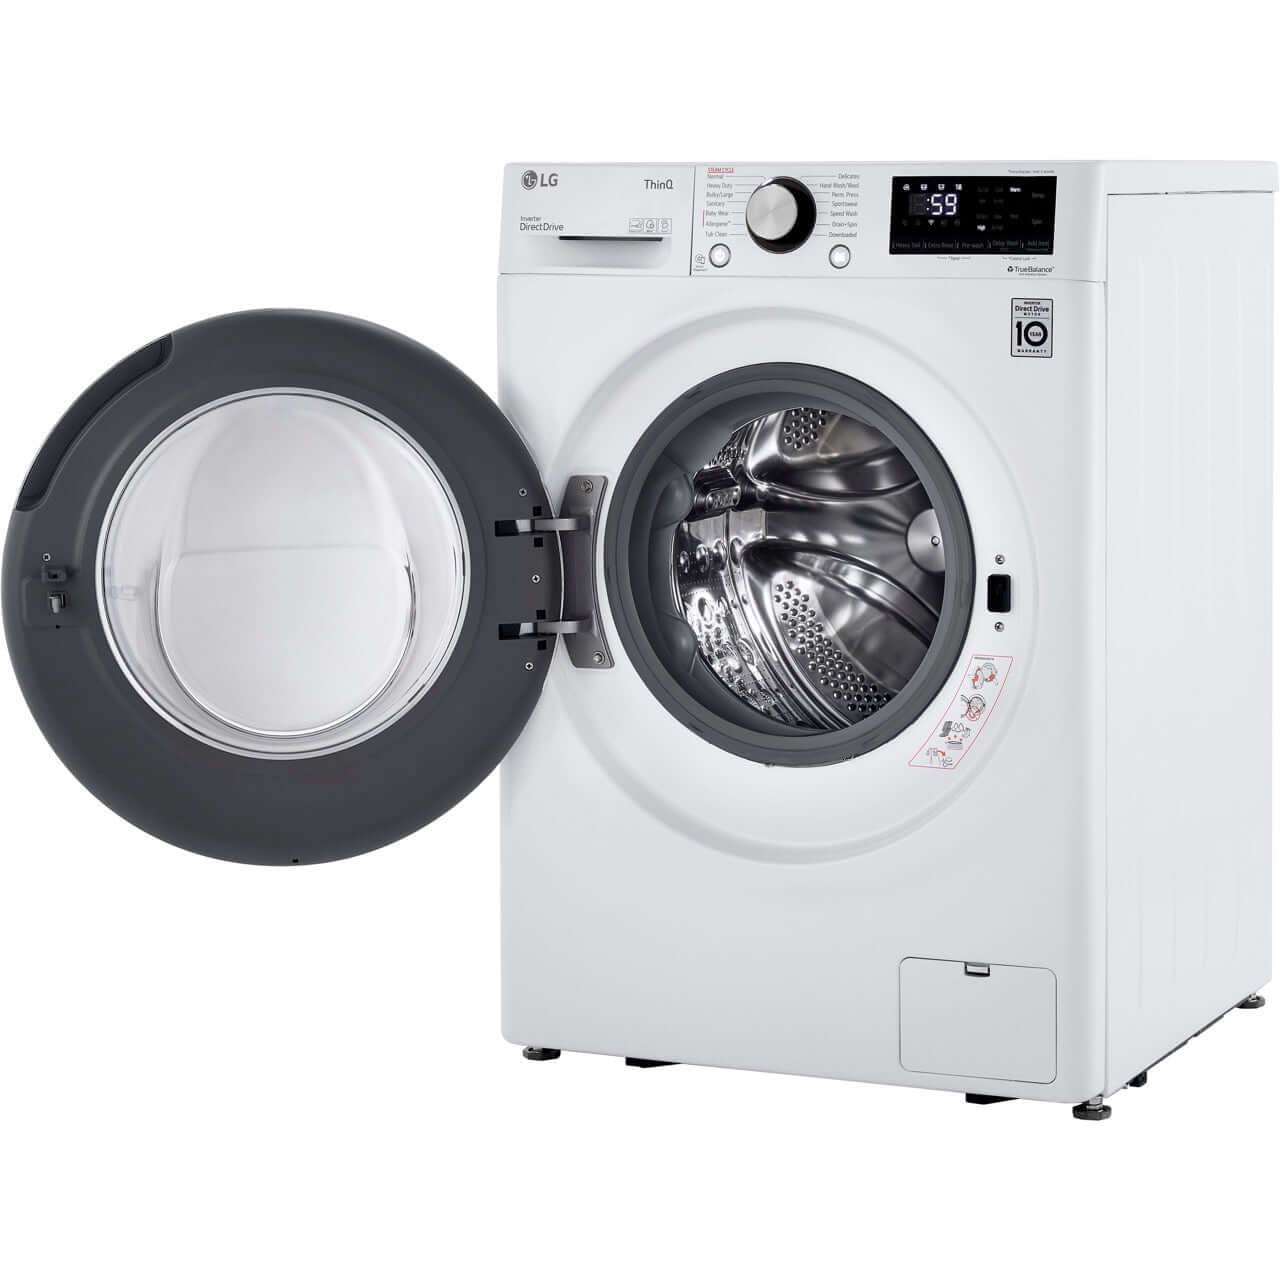 LG 2.4-Cu. Ft. Compact Front Load Washer with Built-In Intelligence in White (WM1455HWA)